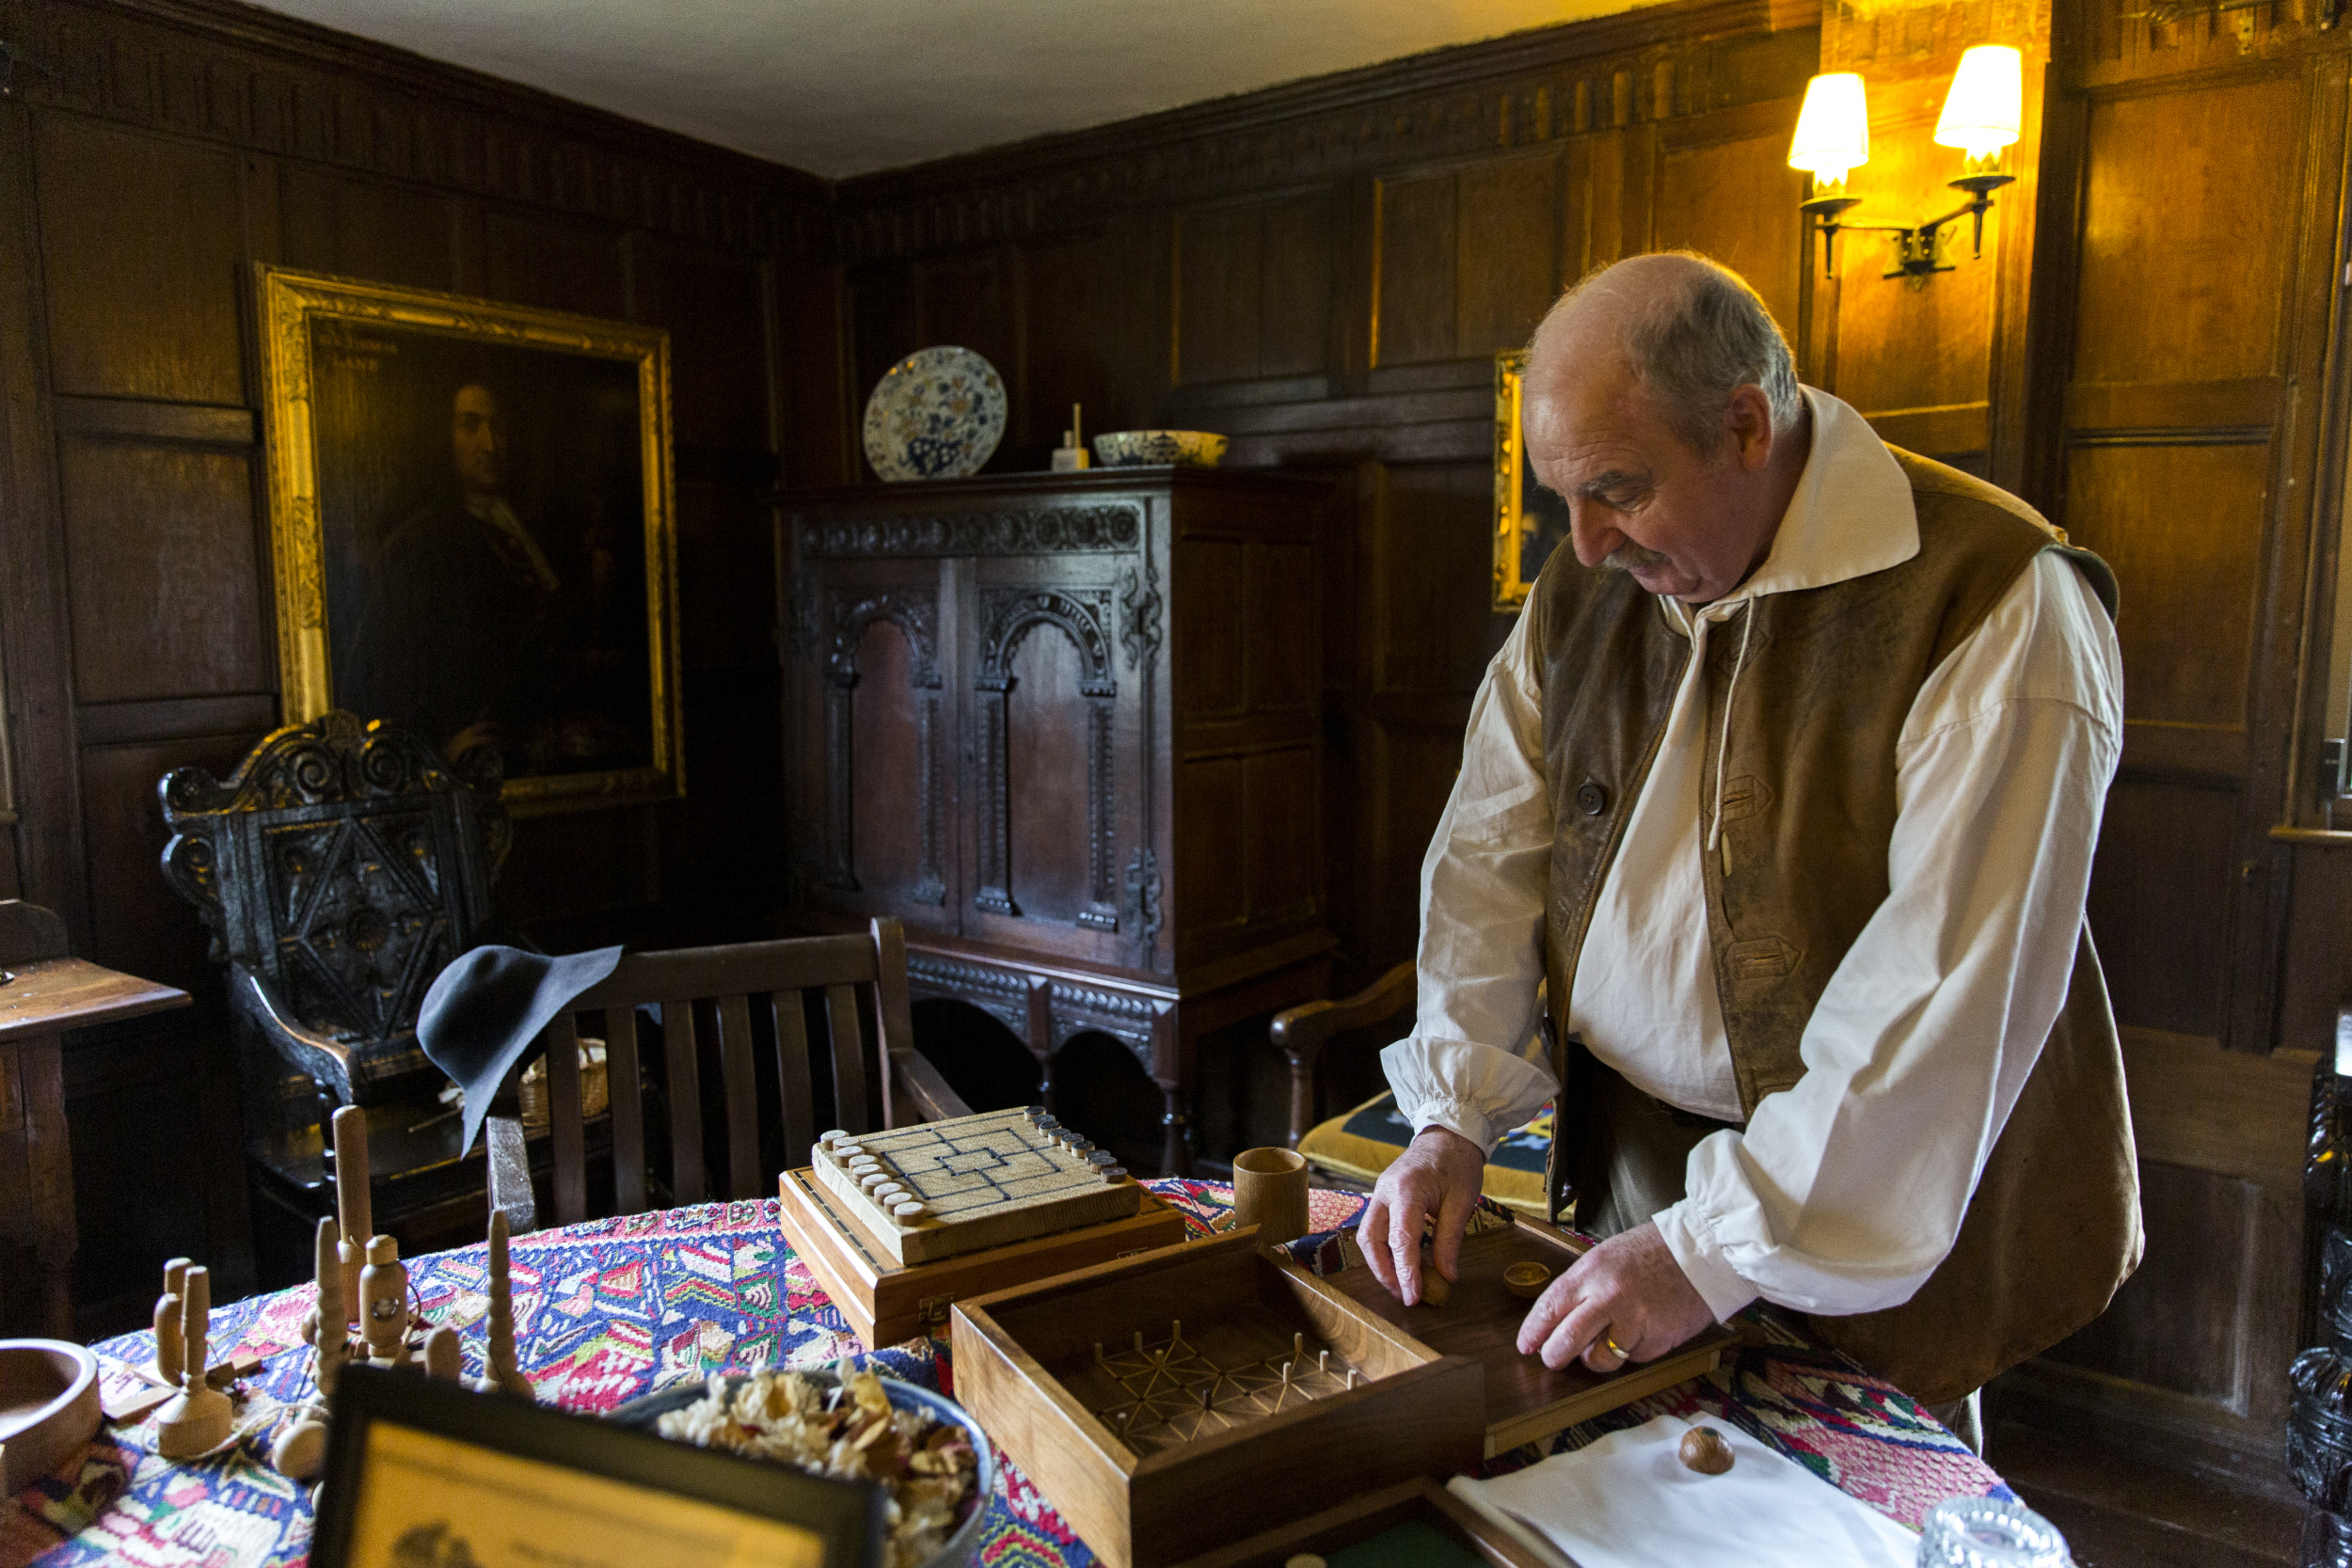 Man in medieval costume sorting through a wooden gaming box on a table in a wood panelled room.